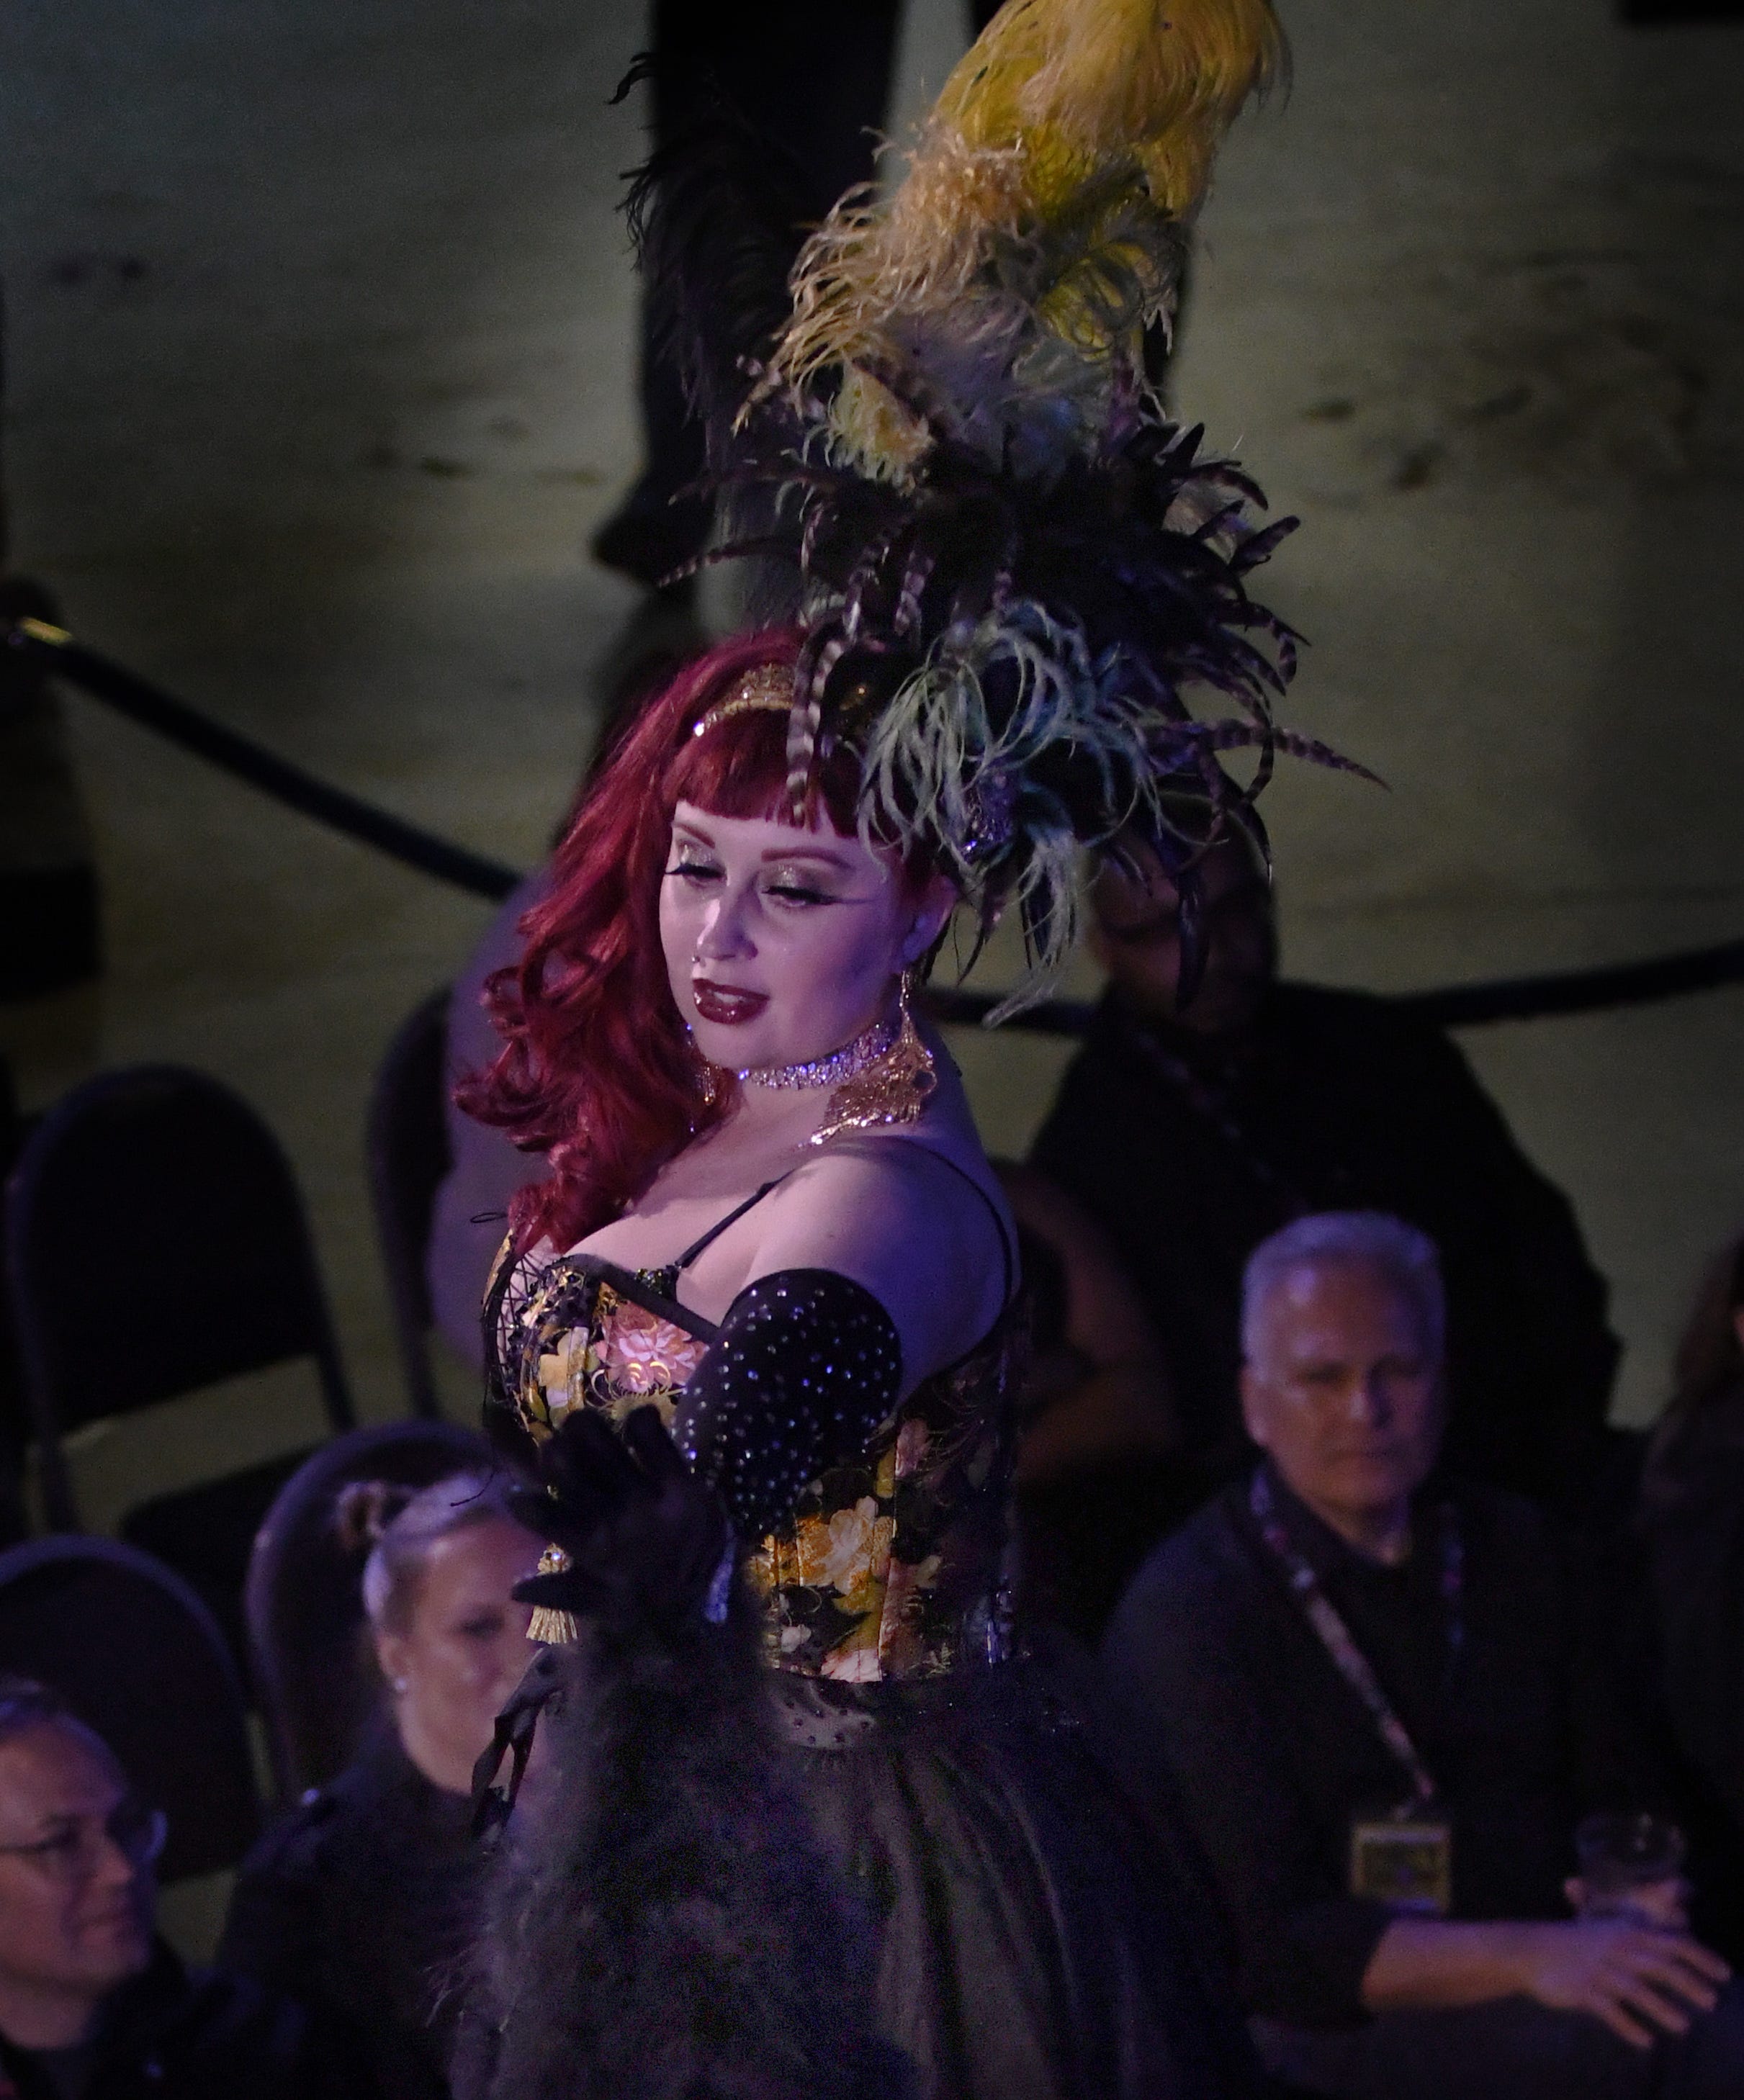 Michigan's own, burlesque artist Miss Holly Hock takes the stage.